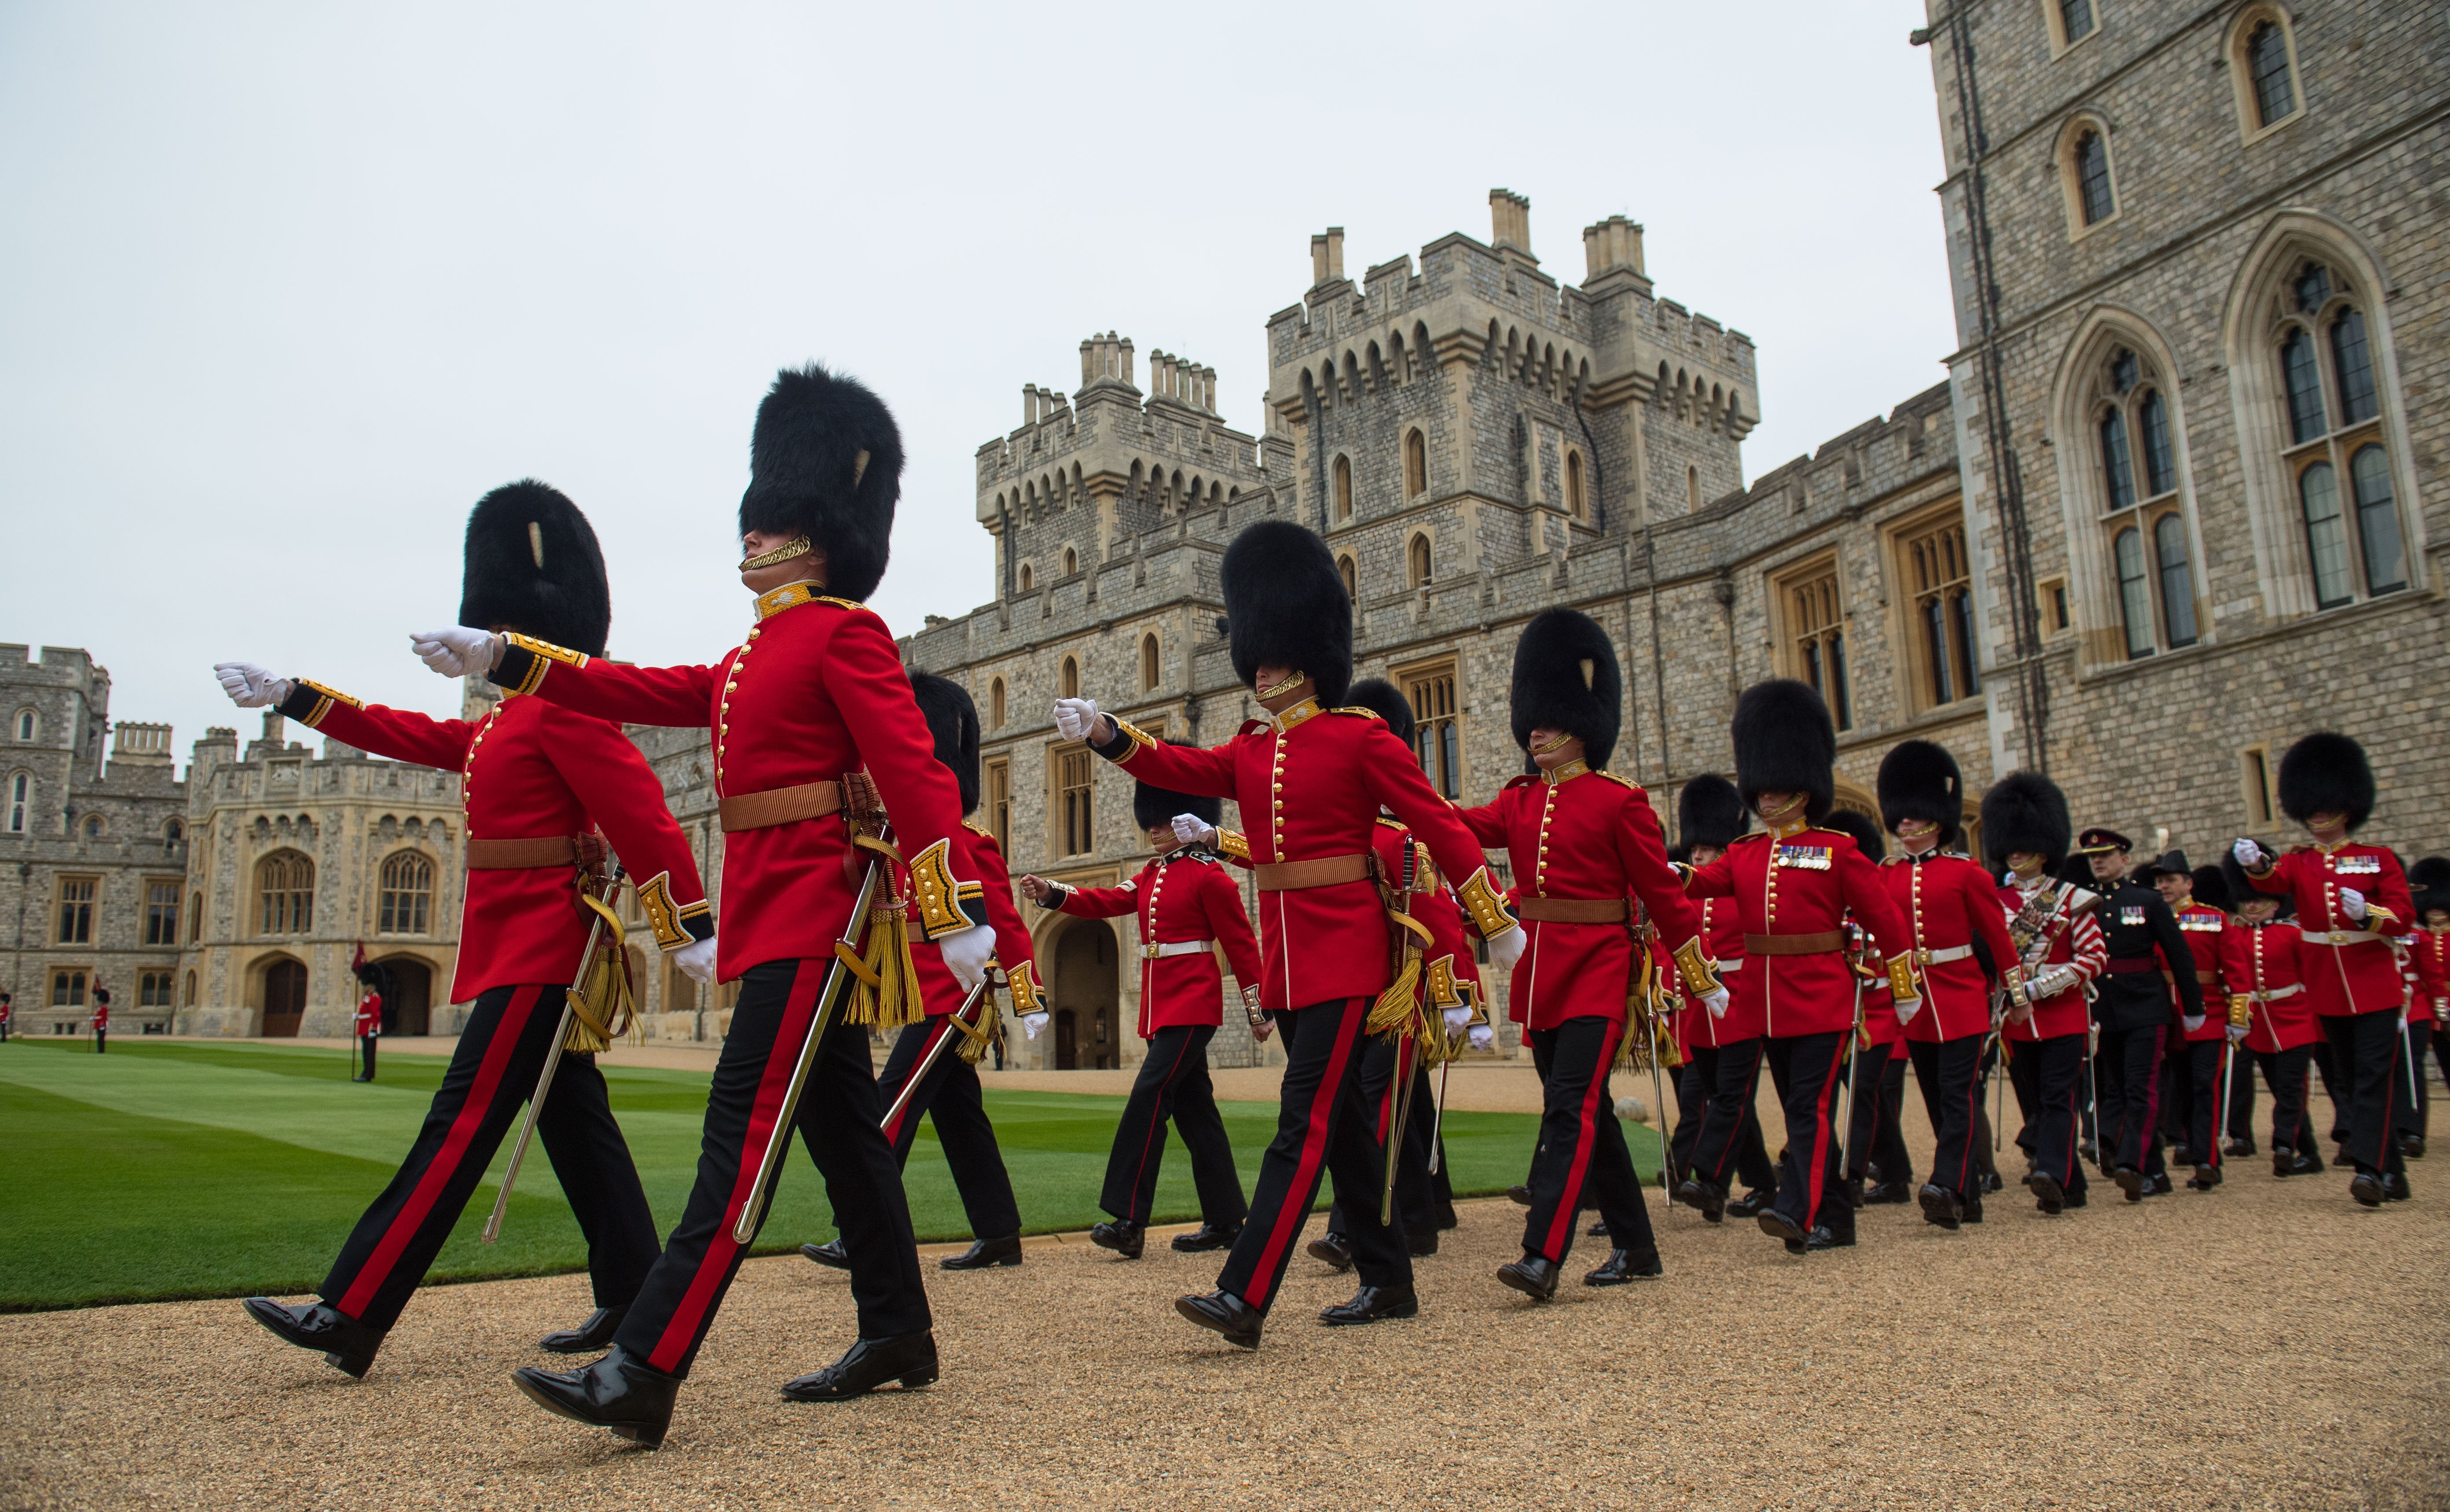 A parade by the Grenadier Guards at Windsor Castle on March 22, 2019, in Windsor, England. | Source: Getty Images.